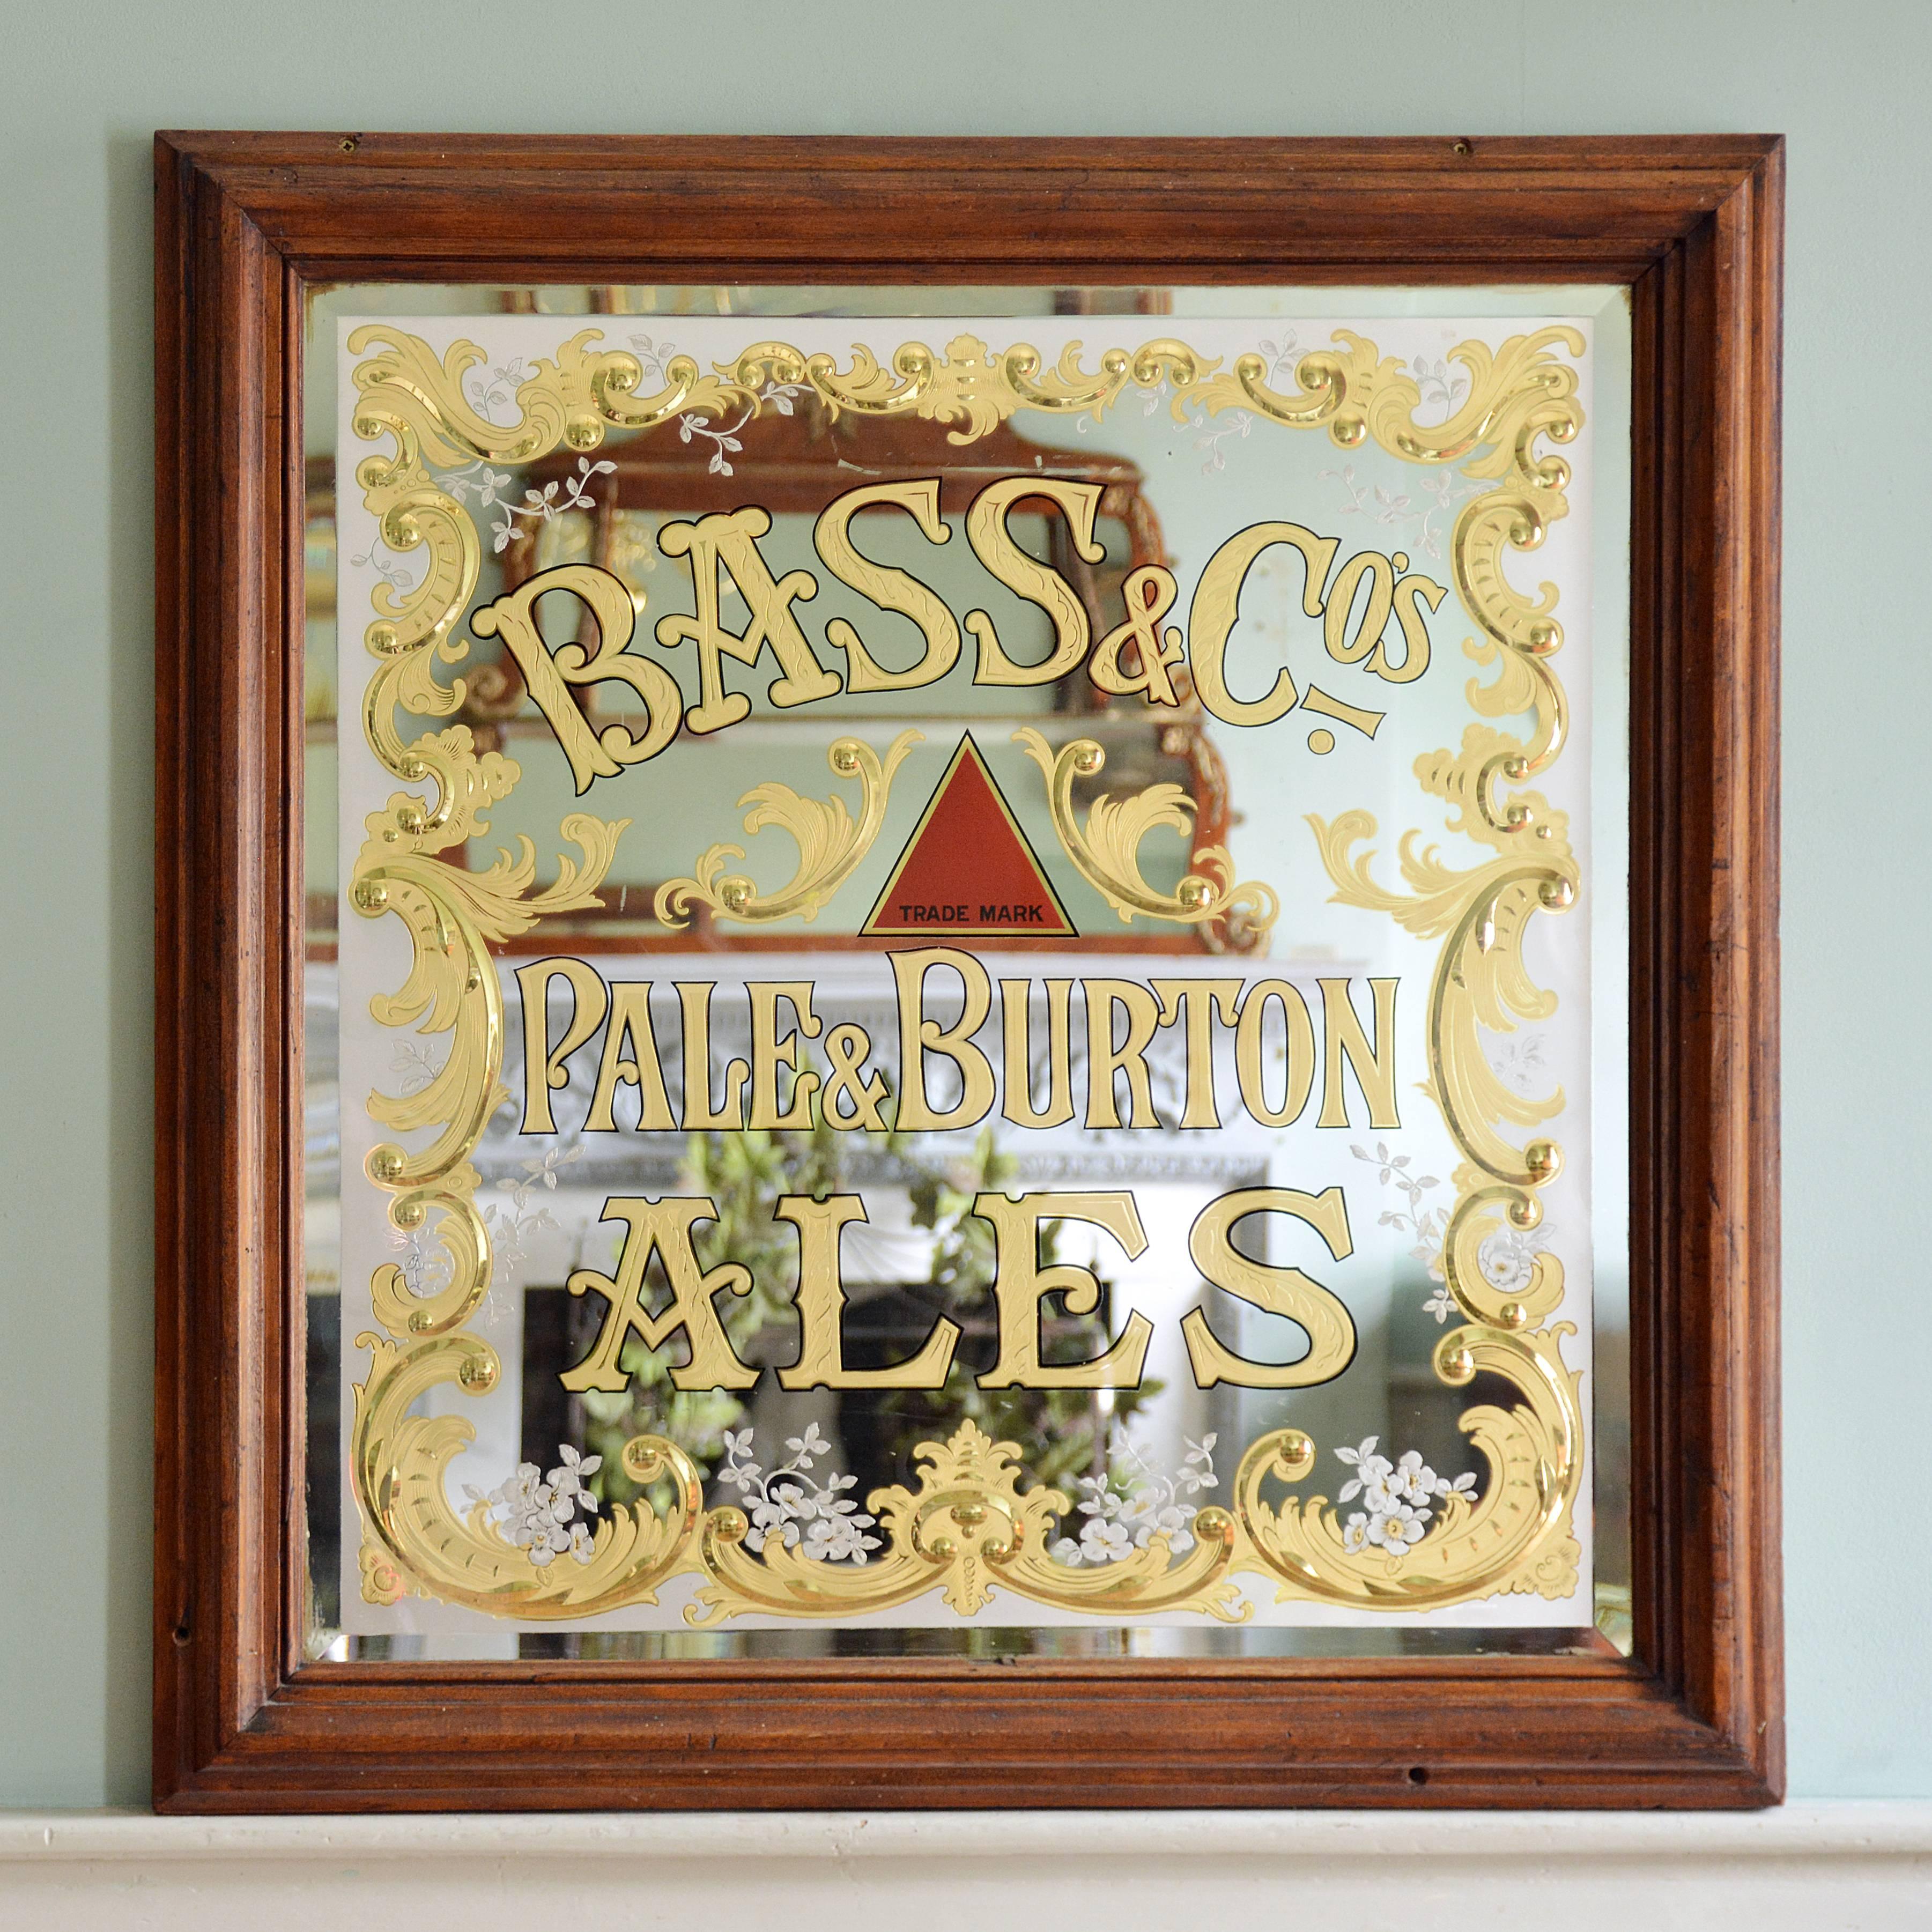 A 'Bass & Co' pub mirror, with gilded and cut C-scroll and foliate border, in reverse moulded frame.

Available to view at Brunswick House, London.

Measures: Height 107.5cm, width 105cm, depth 7cm.
 